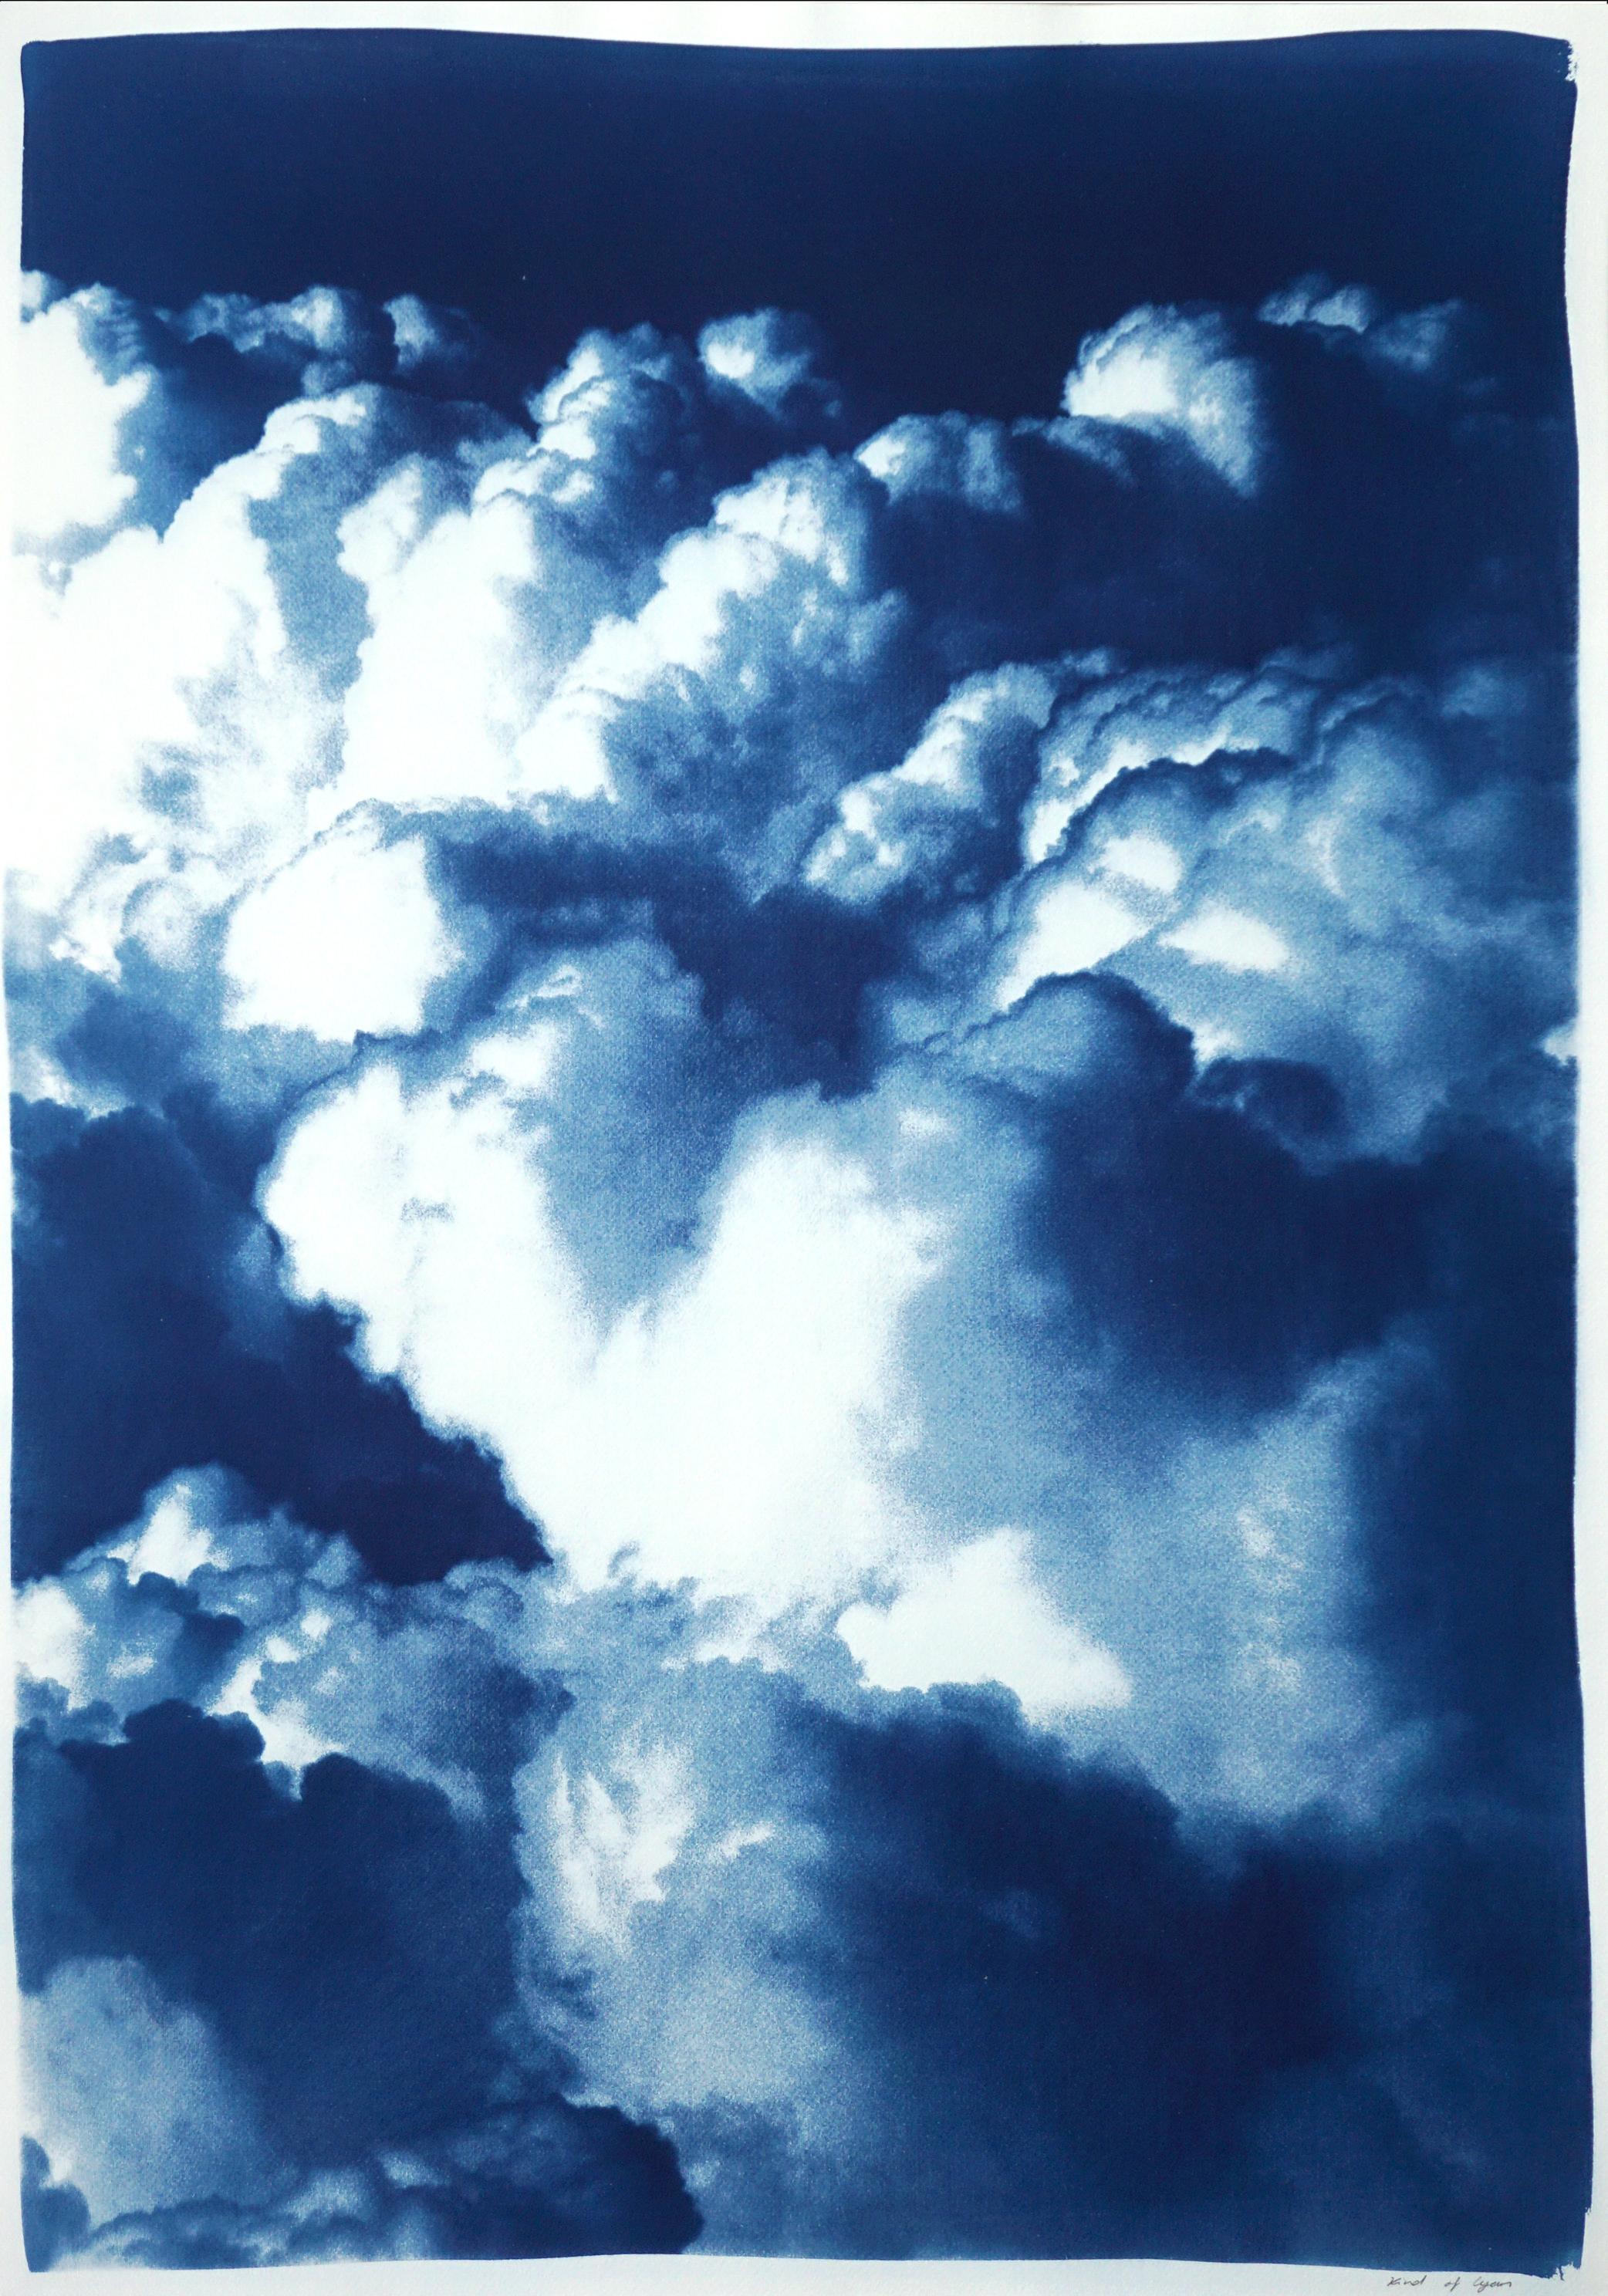 Multipanel Triptych, Serene Gorgeous Clouds, Handmade Cyanotype, Blue and White - Purple Landscape Print by Kind of Cyan